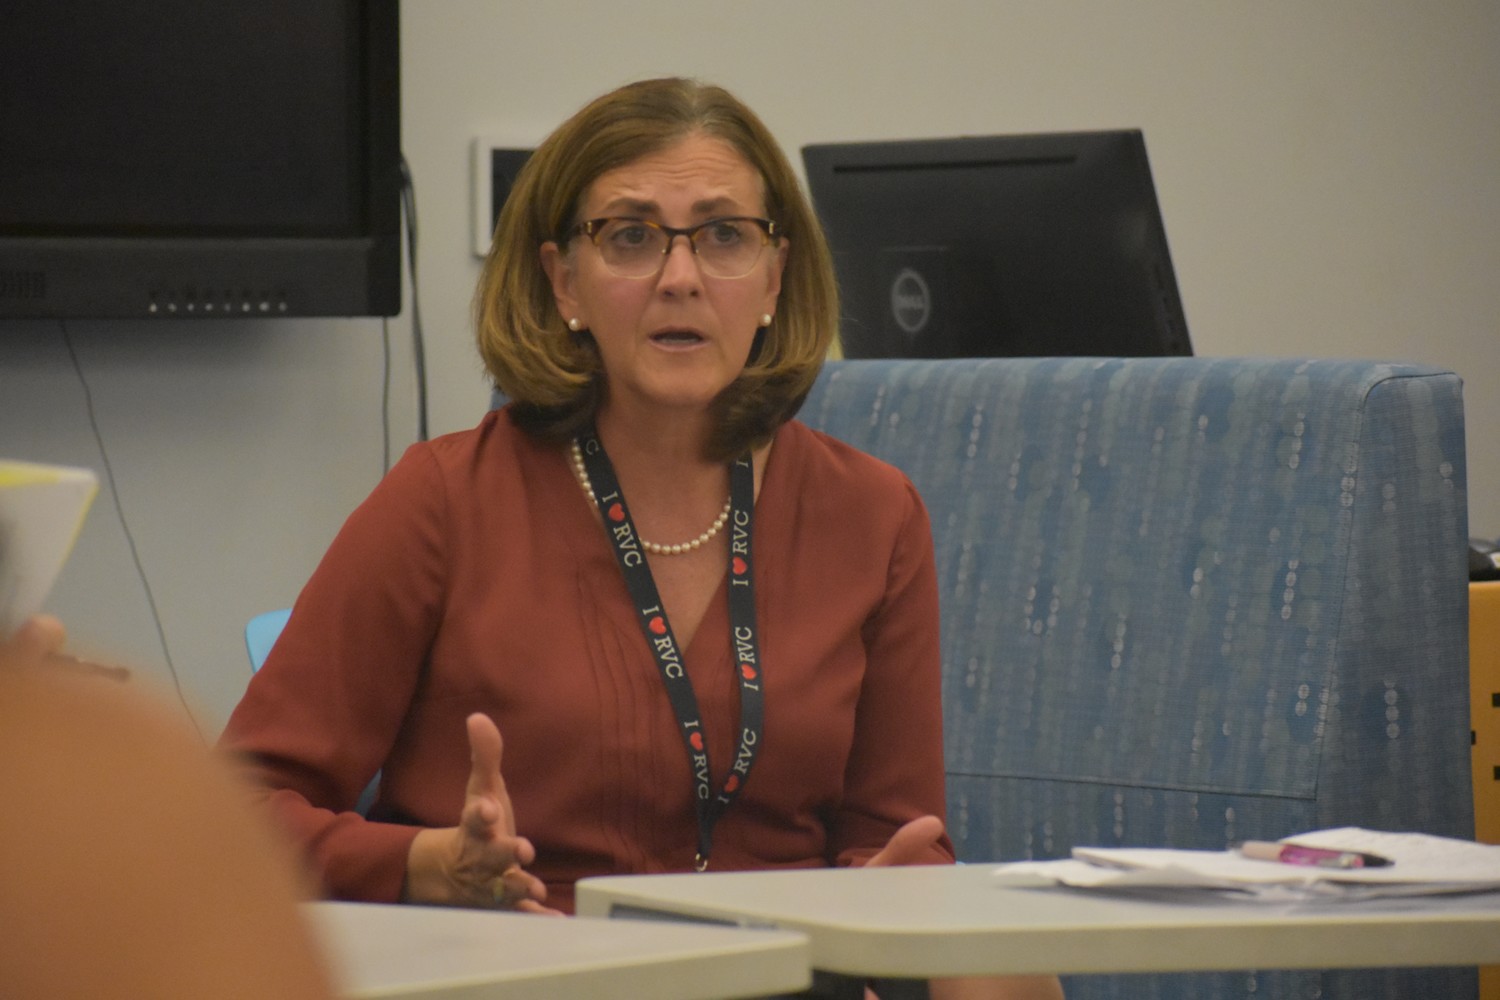 Dr. Noreen Leahy, assistant superintendent of special education and pupil personnel services, discussed what the district has done to address concerns from parents of children with learning disabilities at a meeting on Oct. 4.